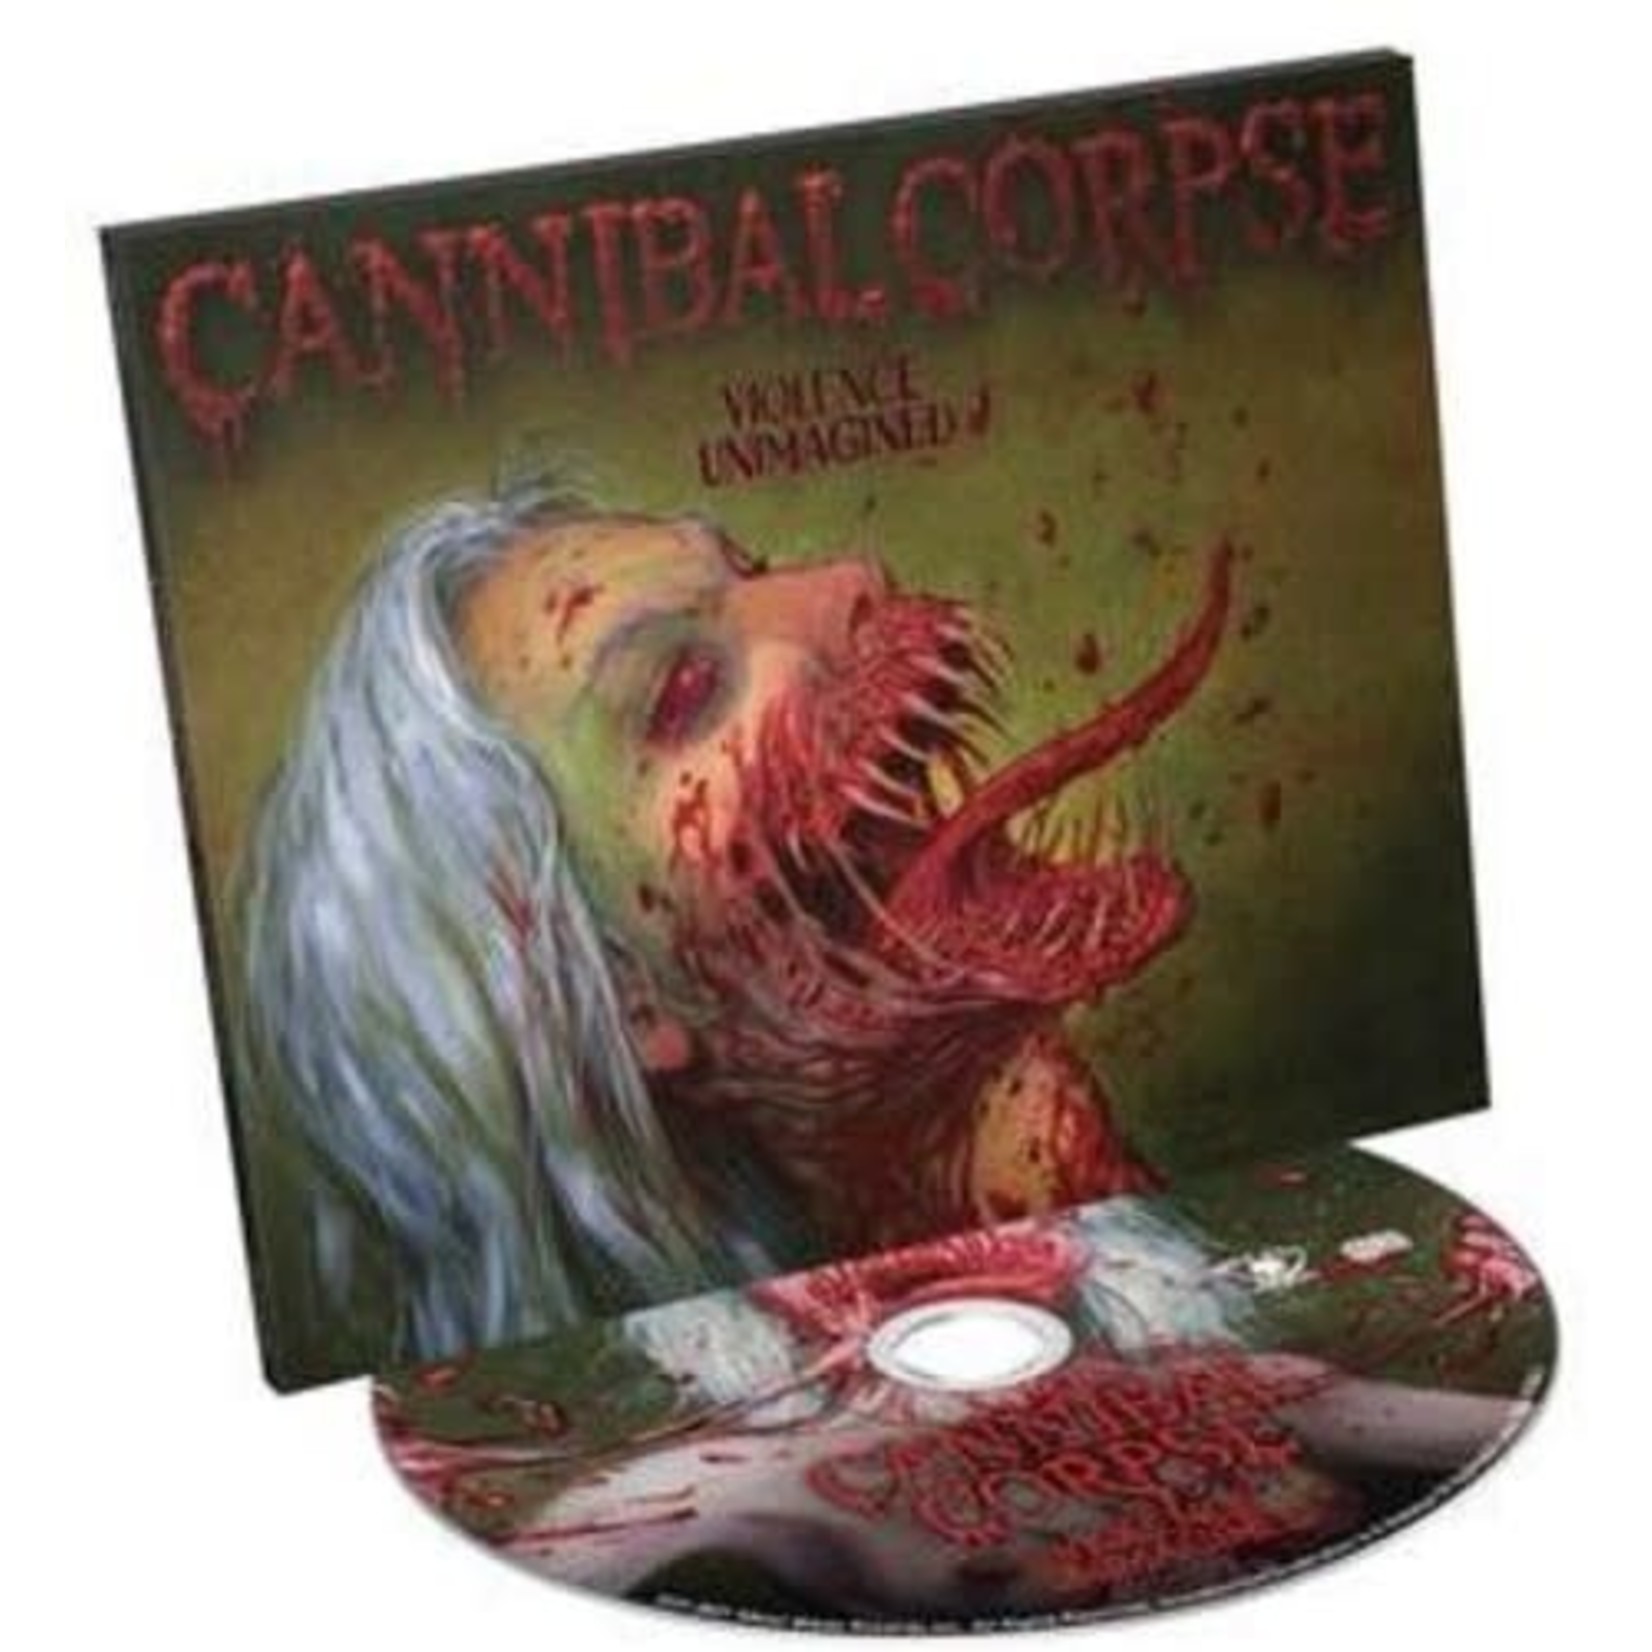 Cannibal Corpse - Violence Unimagined [CD]